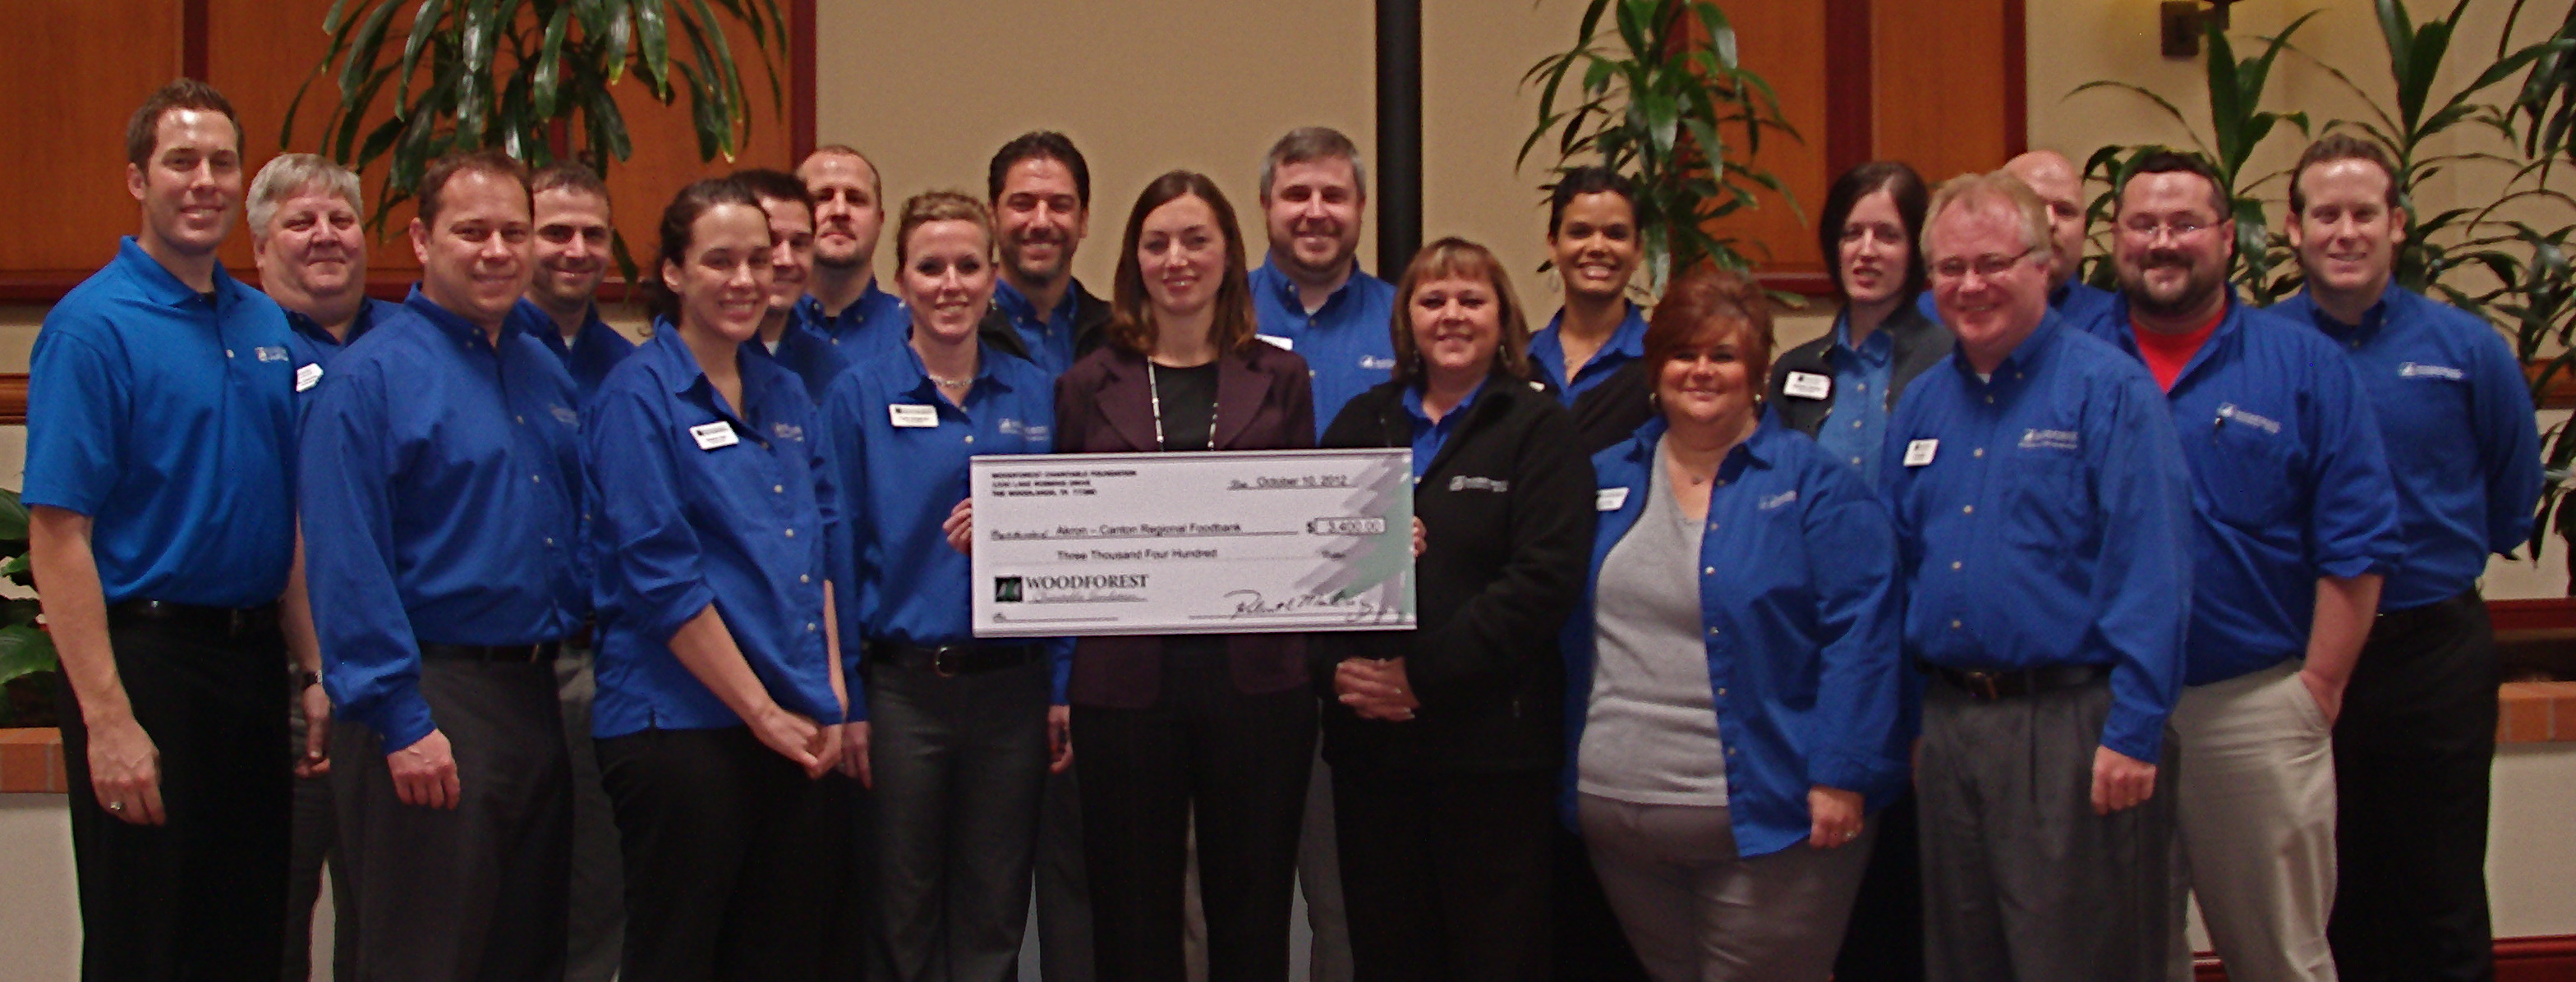 Akron-Canton Regional Food Bank receives $3,400 donation from Woodforest Charitabel Foundation.